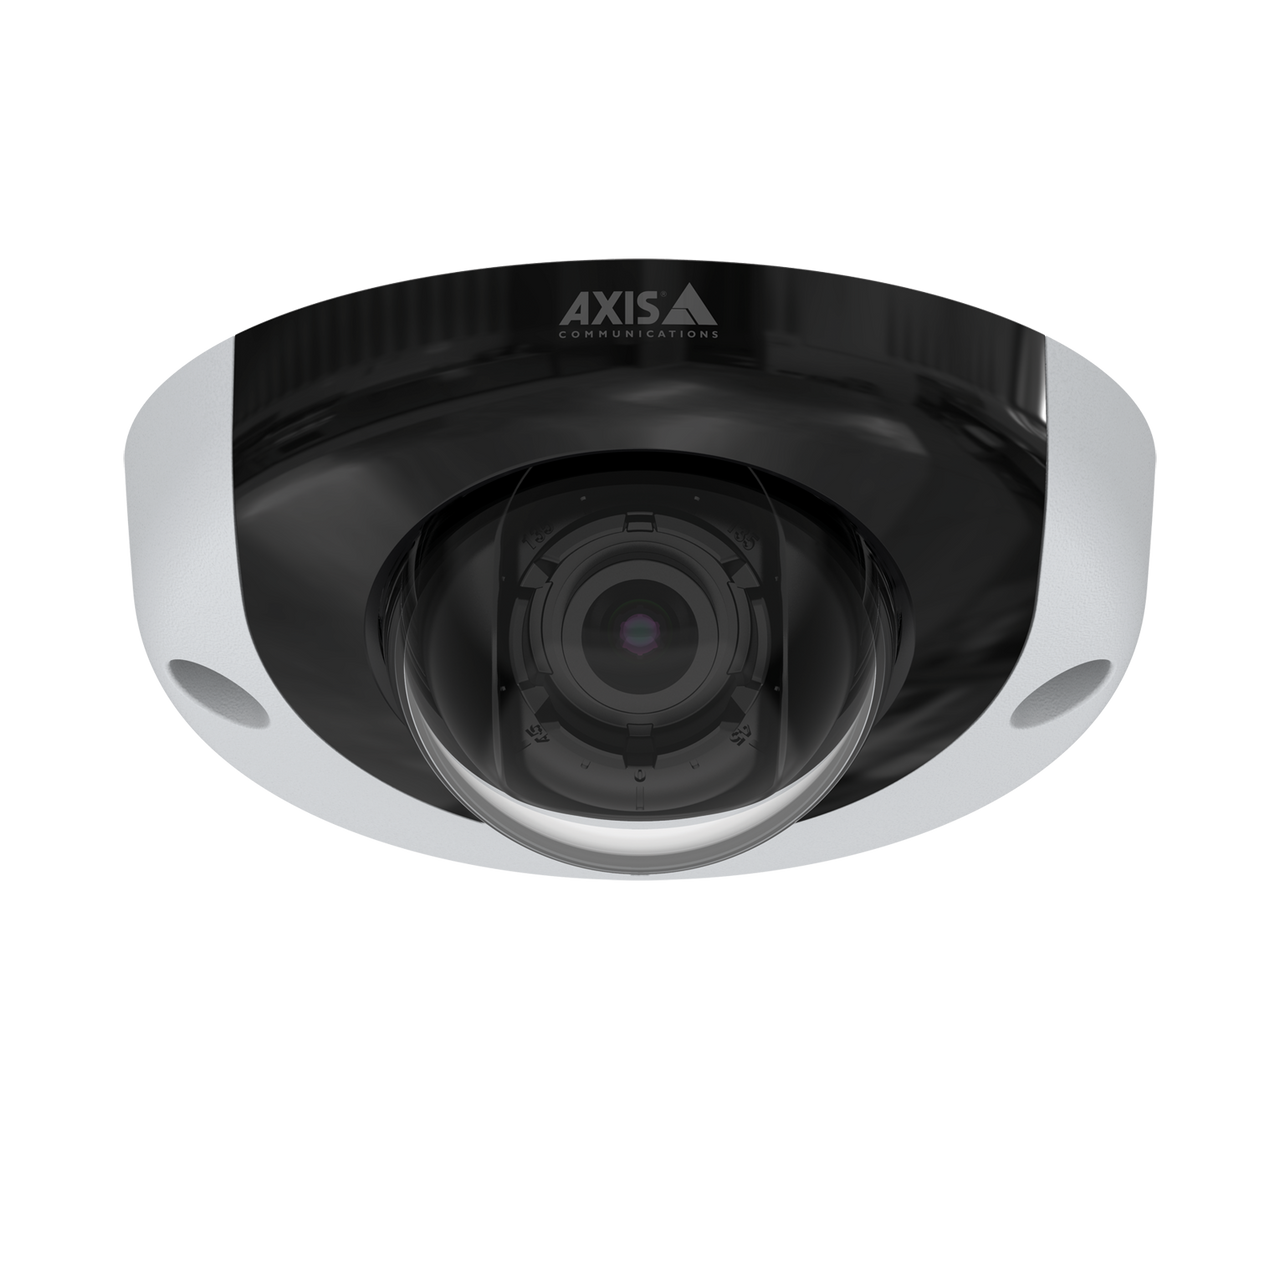 AXIS P3935-LR Best-in-class dome with IR for advanced onboard surveillance